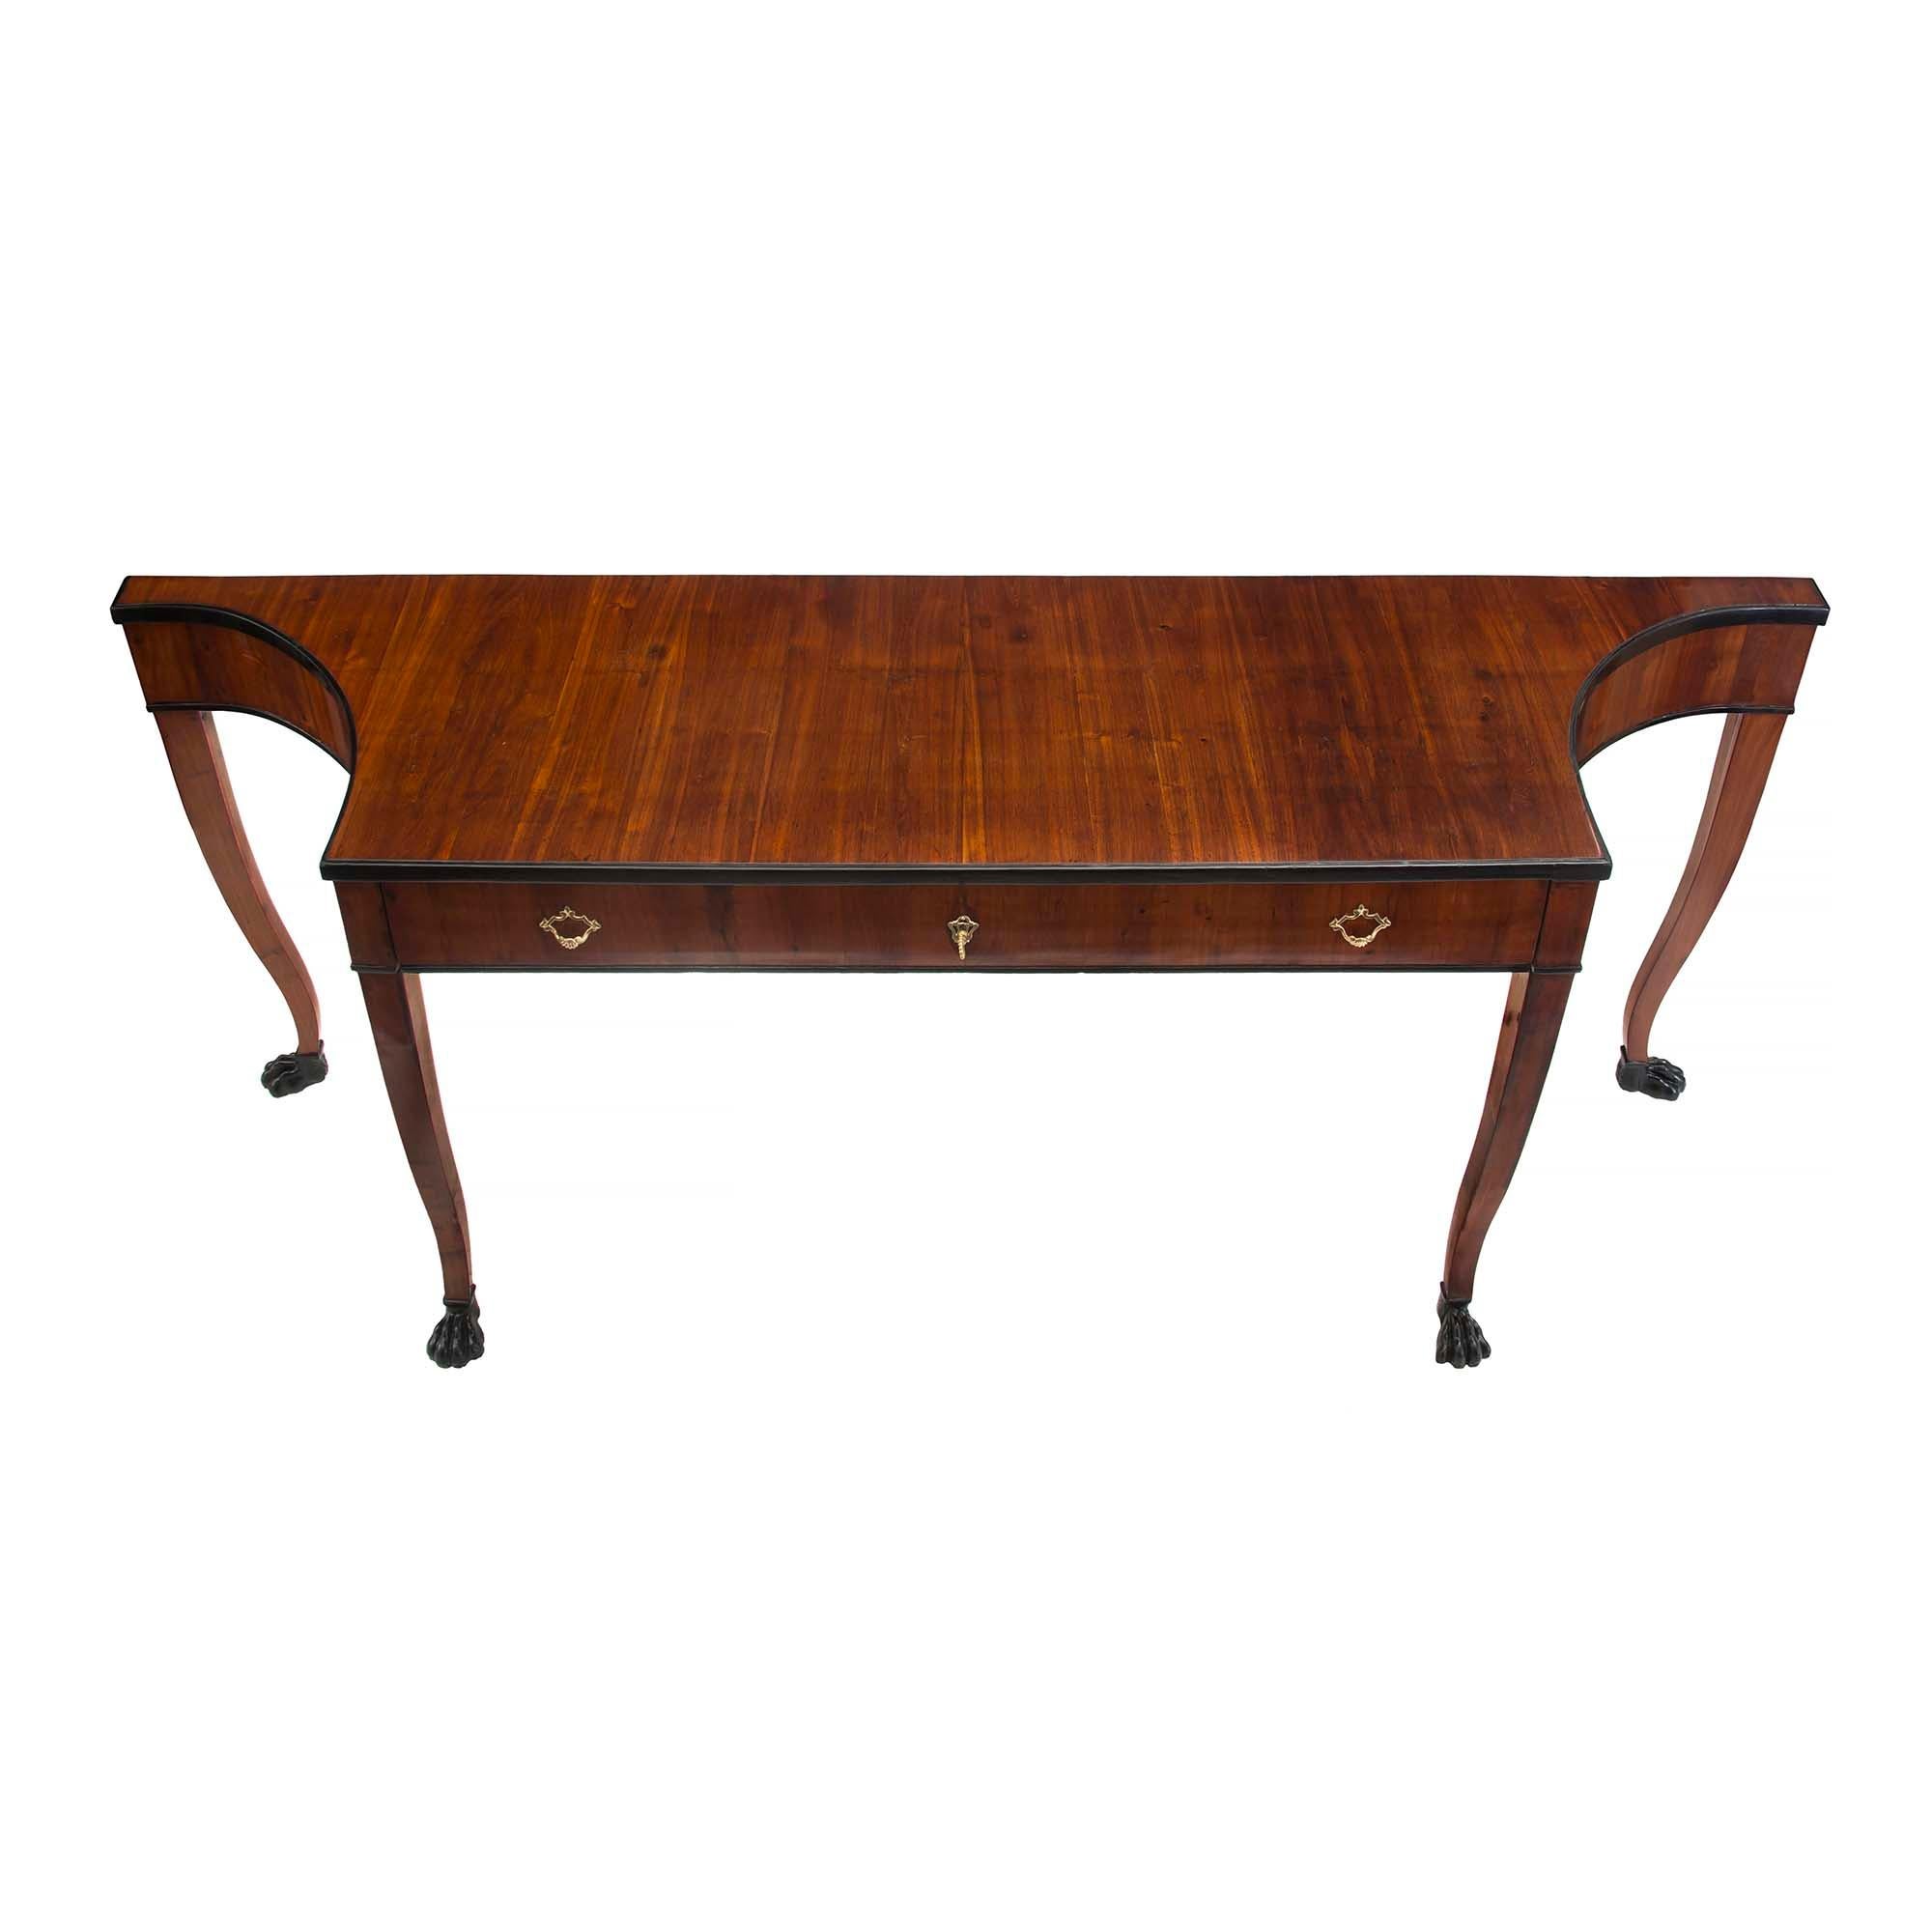 A very handsome and unique Italian early 19th century Neo-Classical st. mahogany and ebonized fruitwood console. This free standing console has four tapered slightly curved legs ending in ebonized fruitwood hoof feet. The wide drawer at the frieze